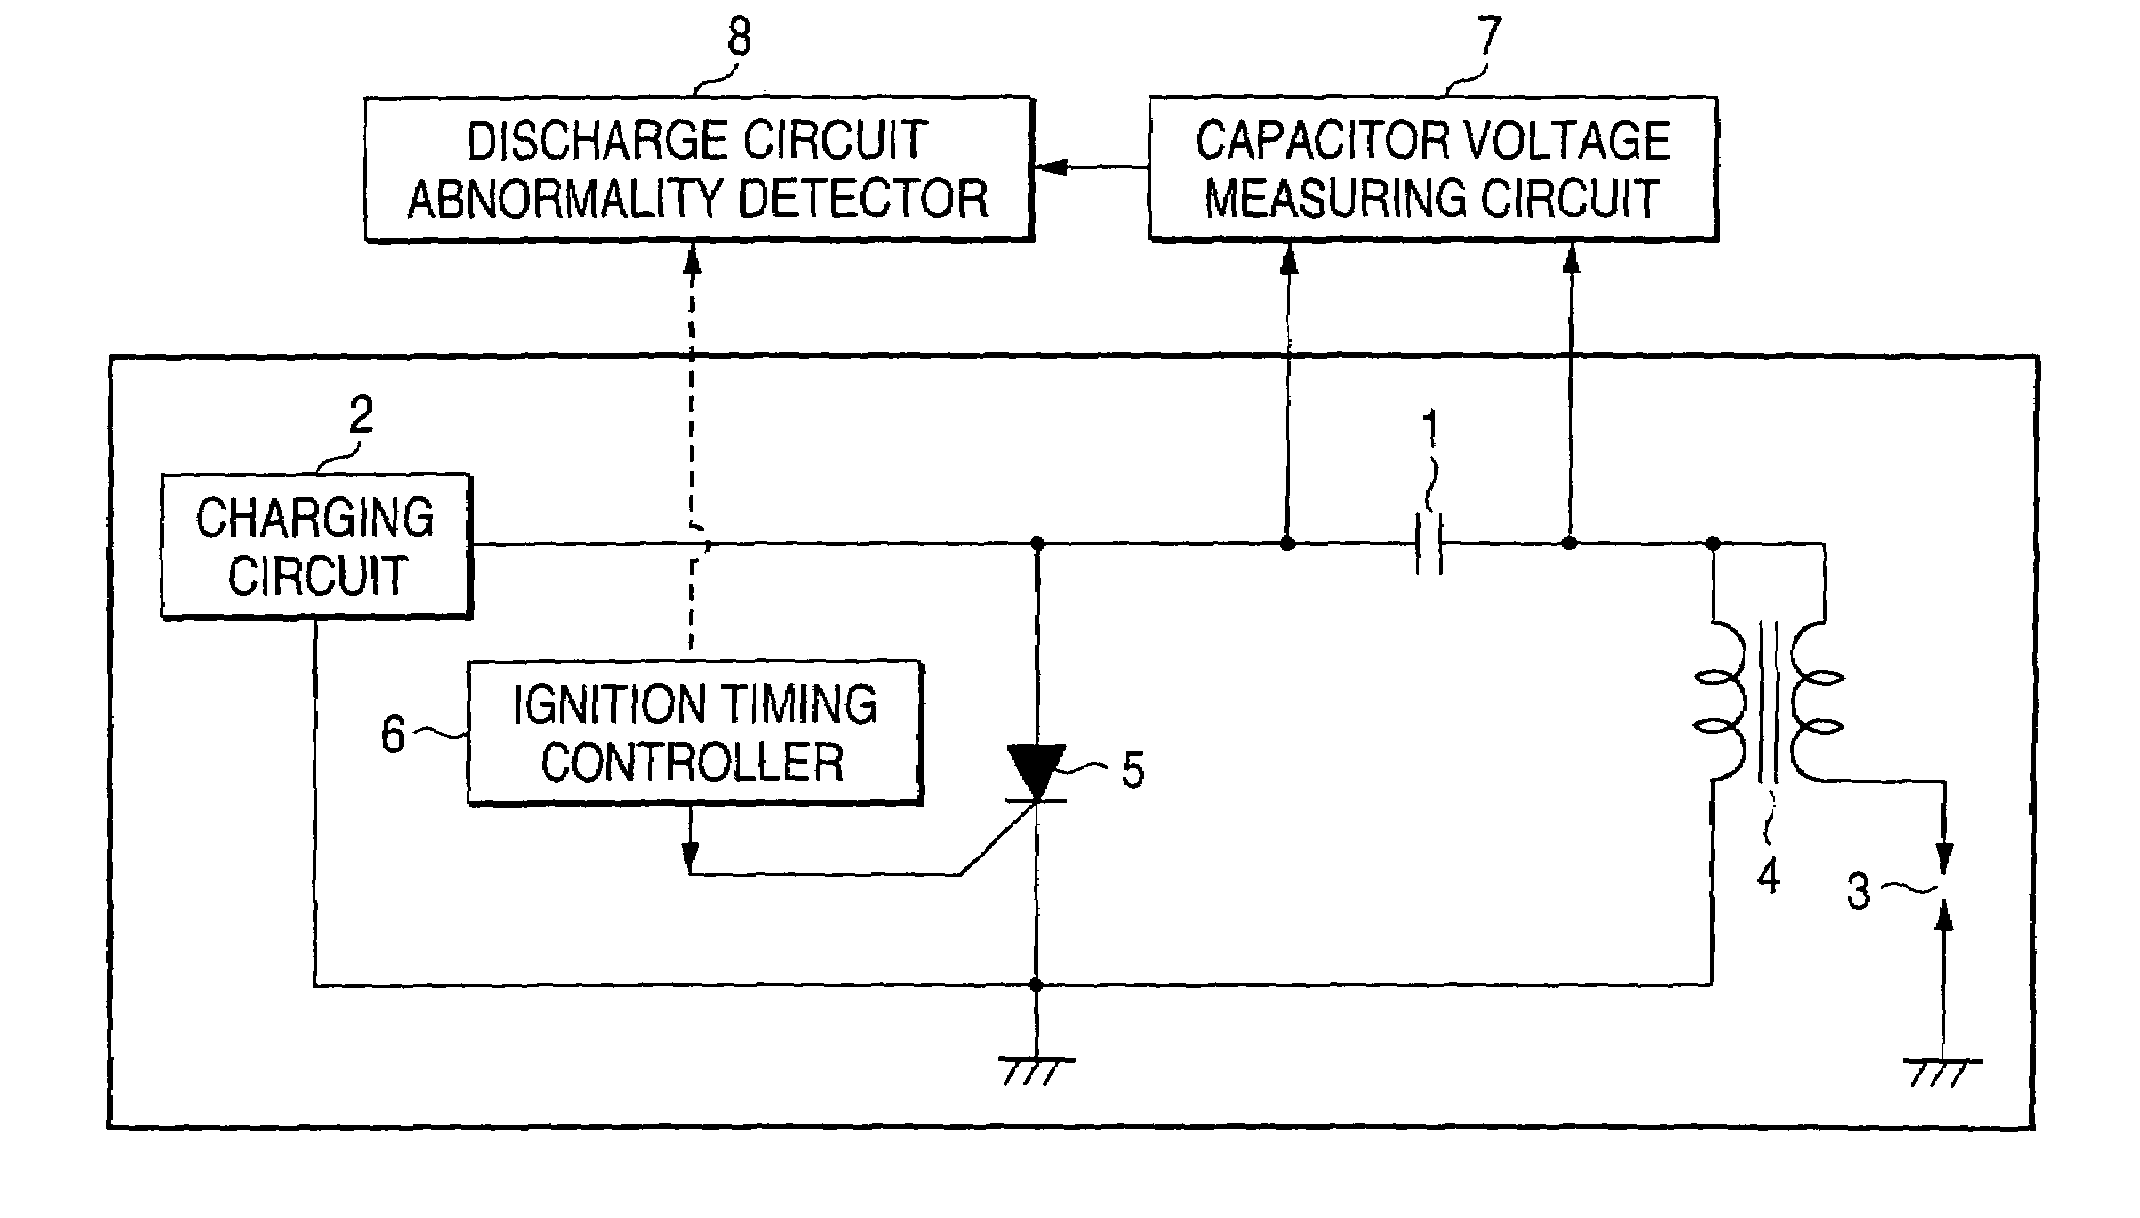 Capacitor discharge ignition device